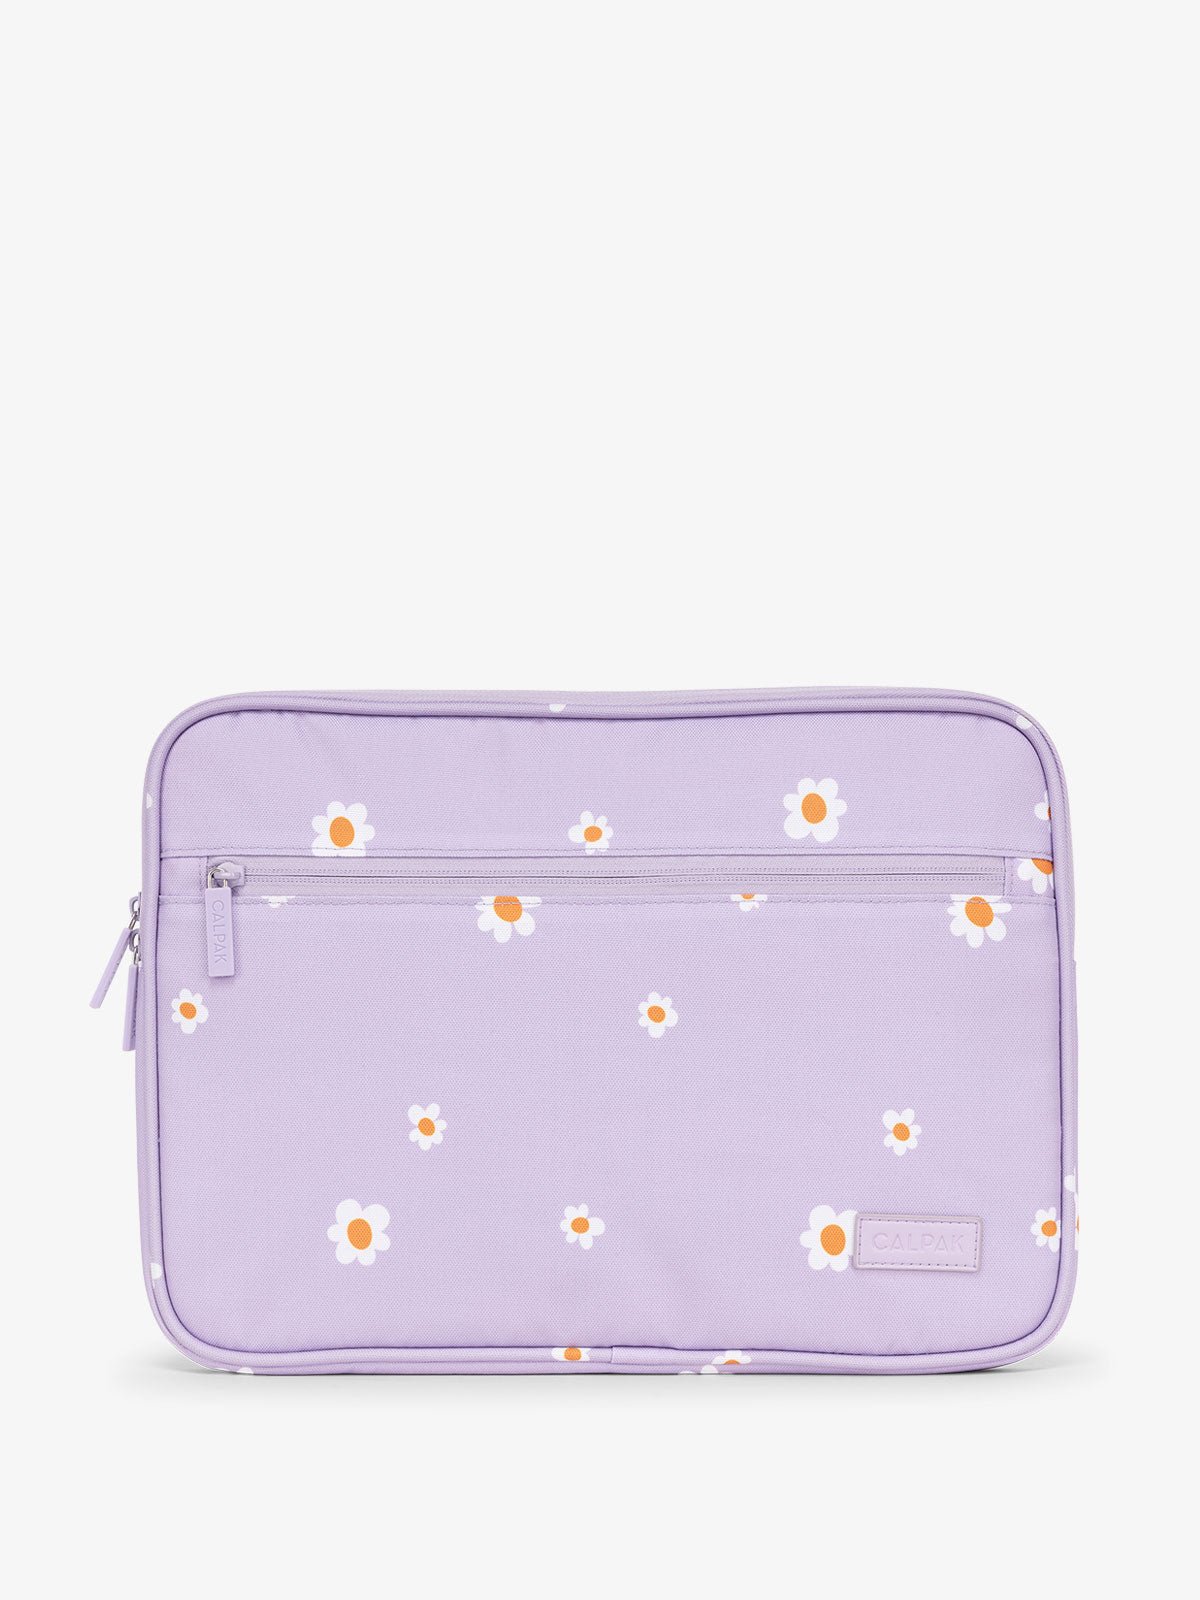 CALPAK 13-14 Inch Laptop Case with zippered front pocket in orchid fields